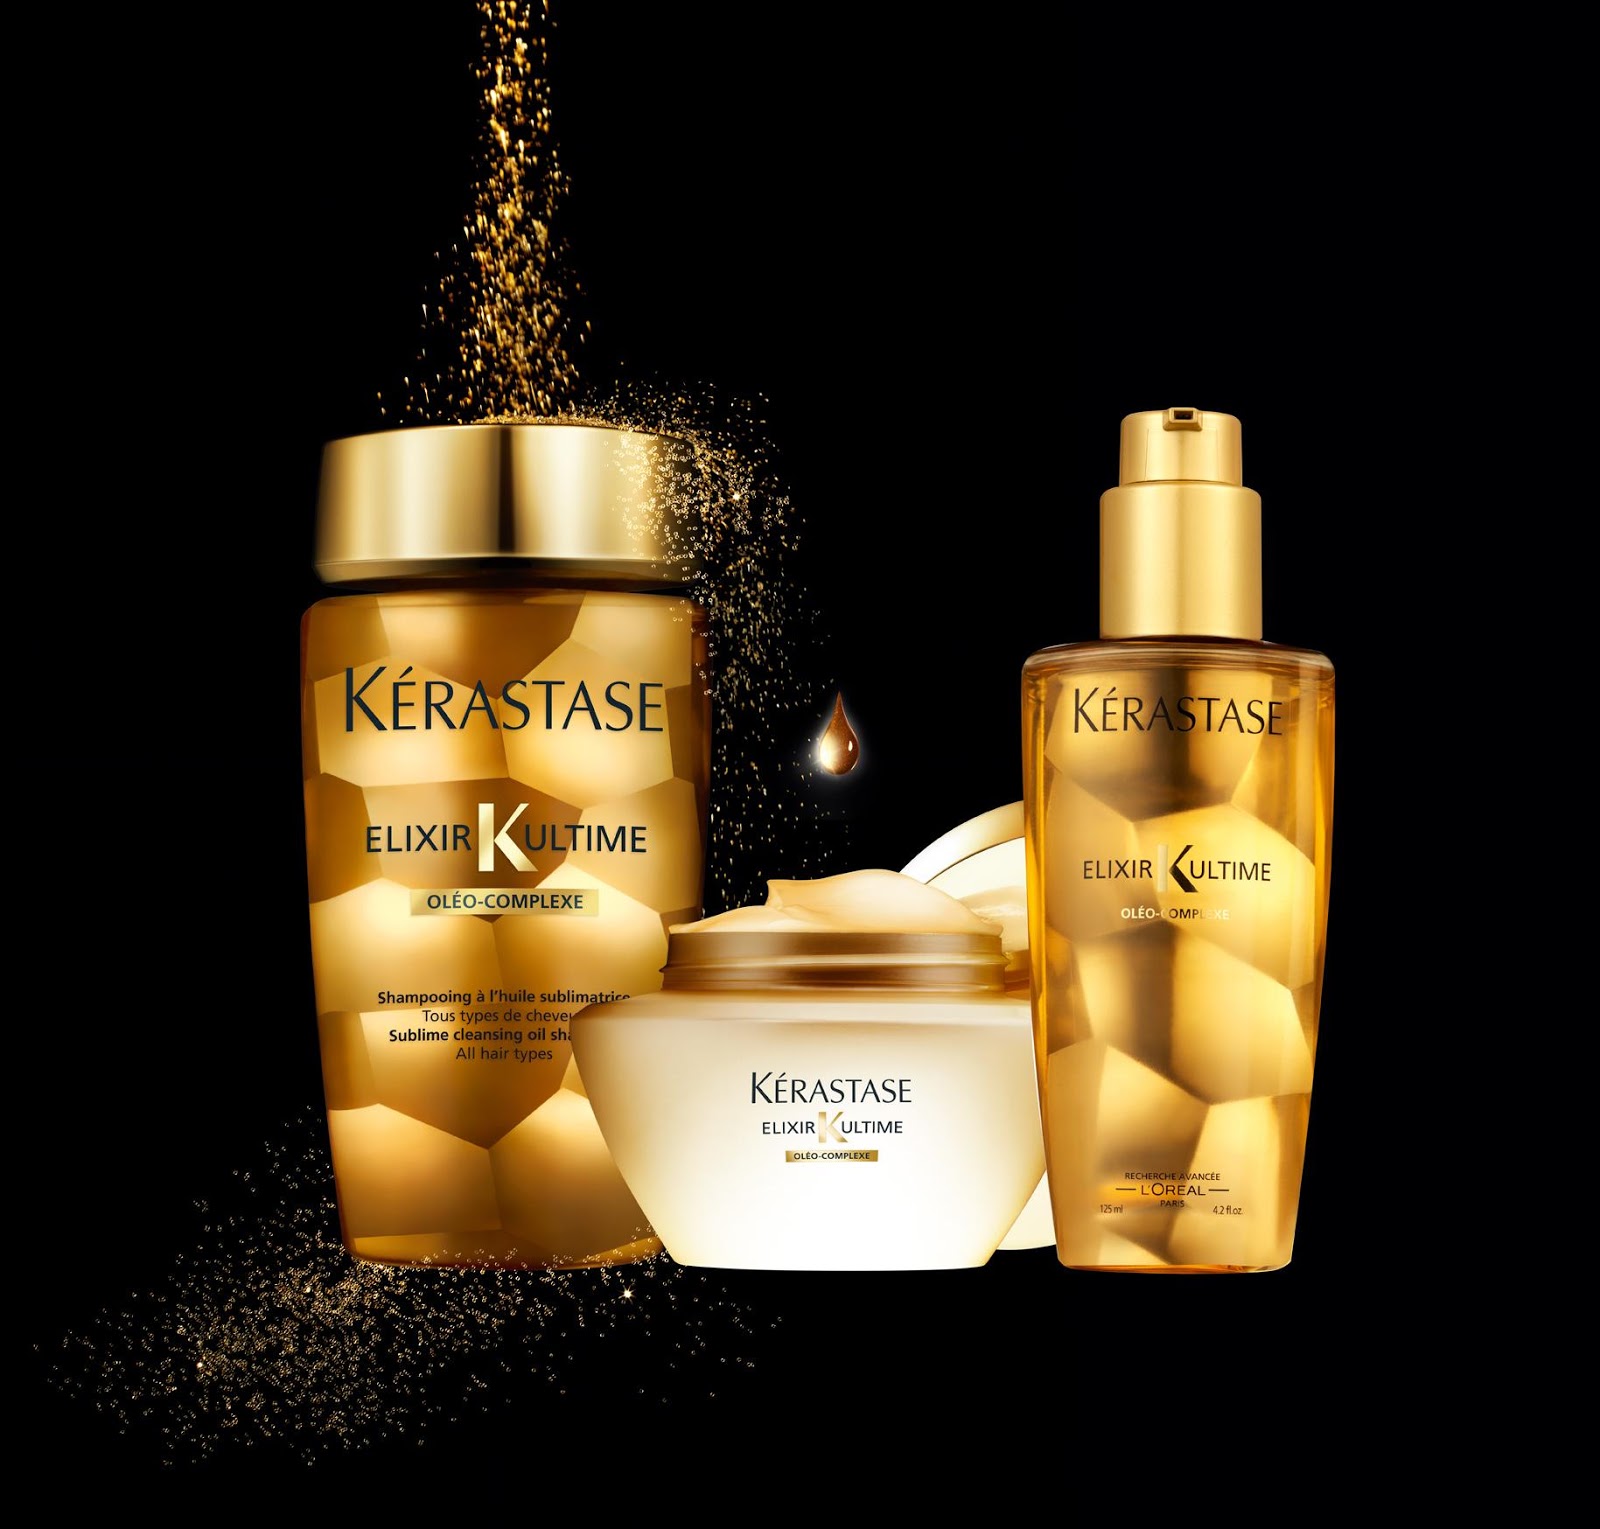 Kérastase offers new products for a salon experience you 